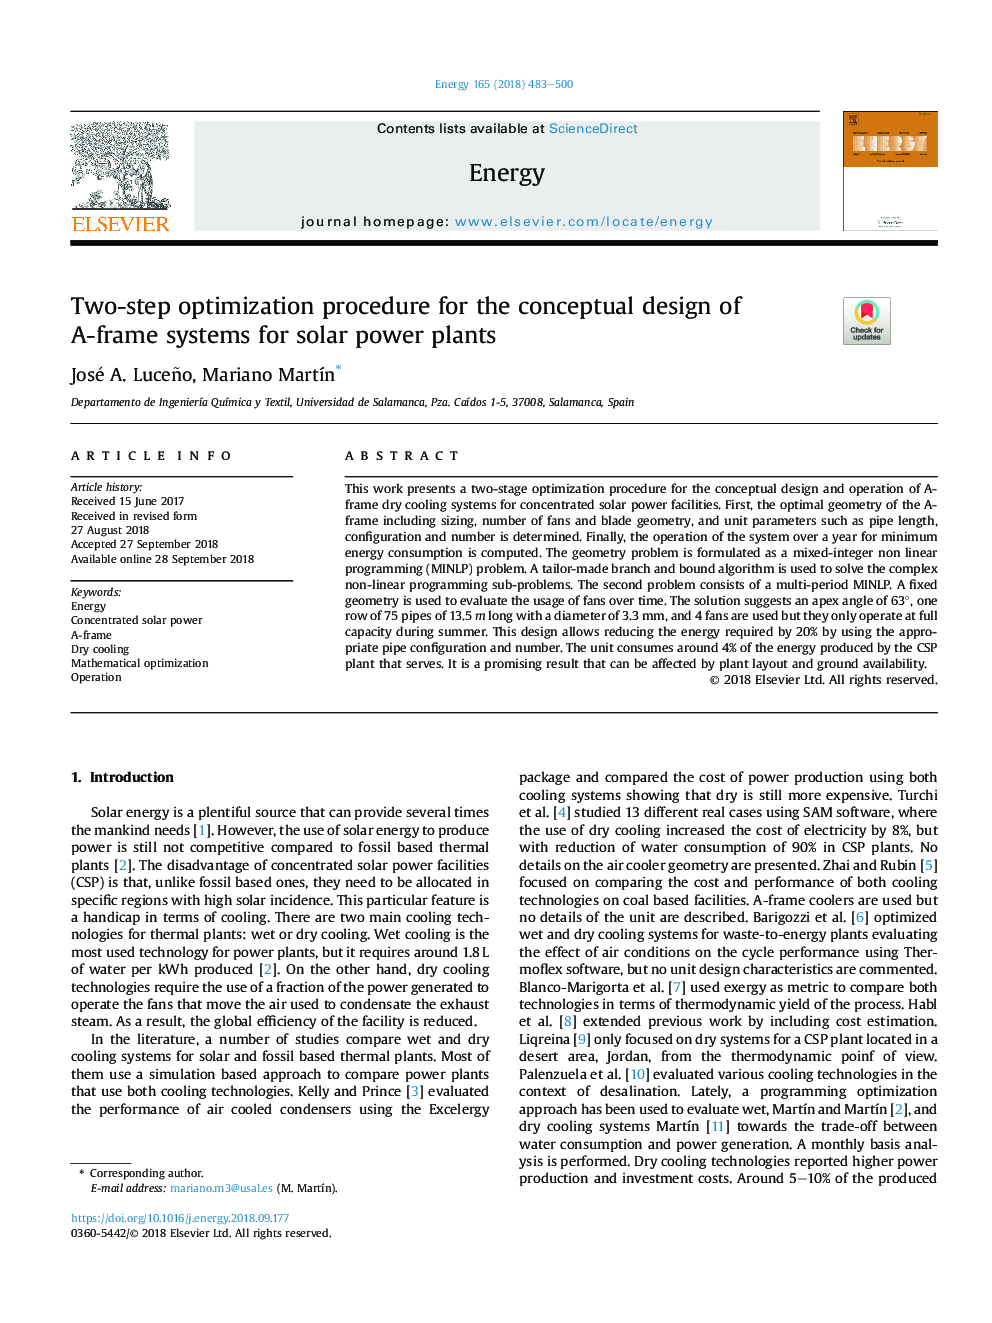 Two-step optimization procedure for the conceptual design of A-frame systems for solar power plants